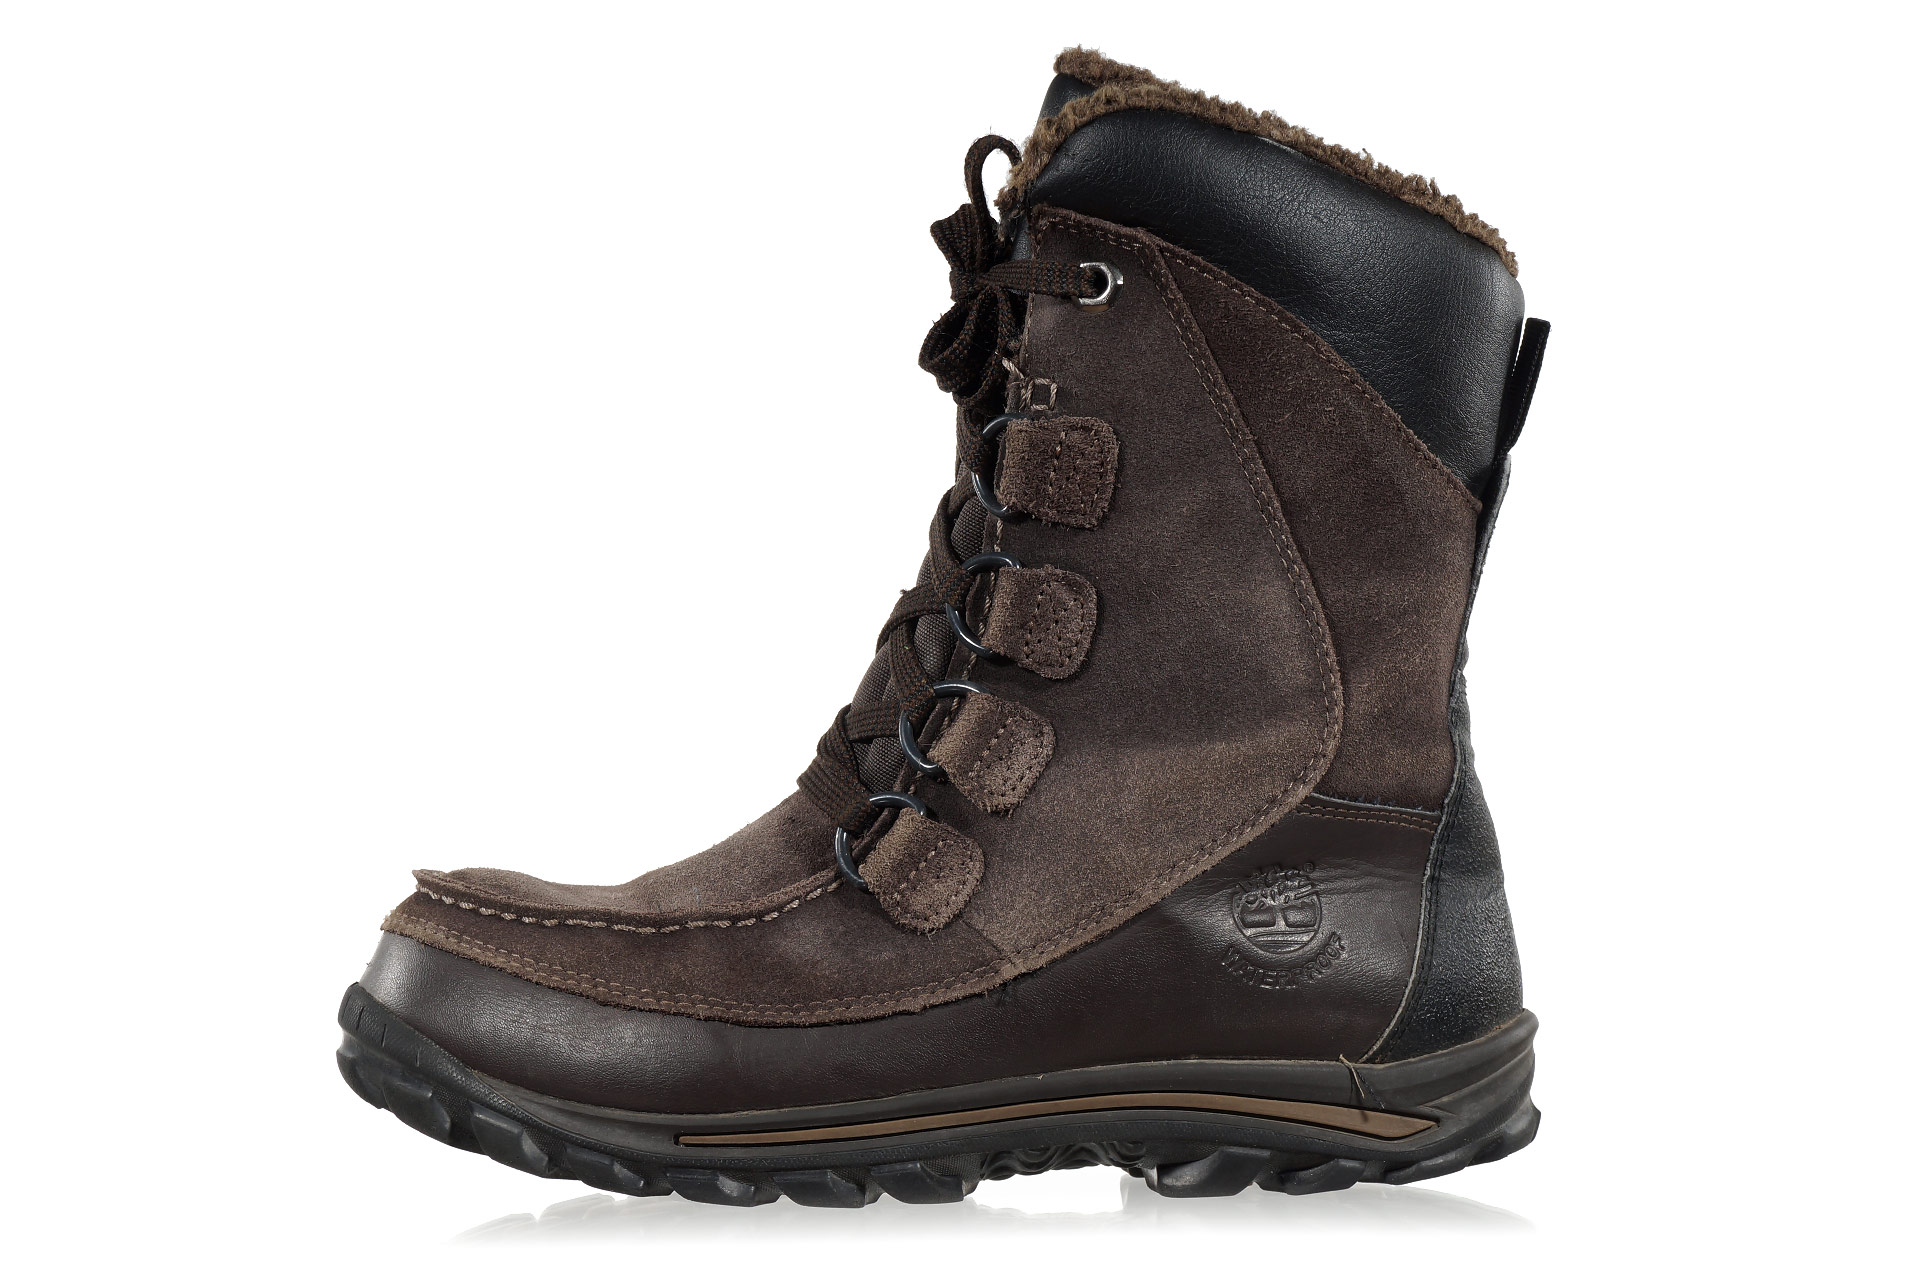 Timberland Chillberg Rime Ridge boots used 32UB buy cheap in online shop vintageshoes.ru